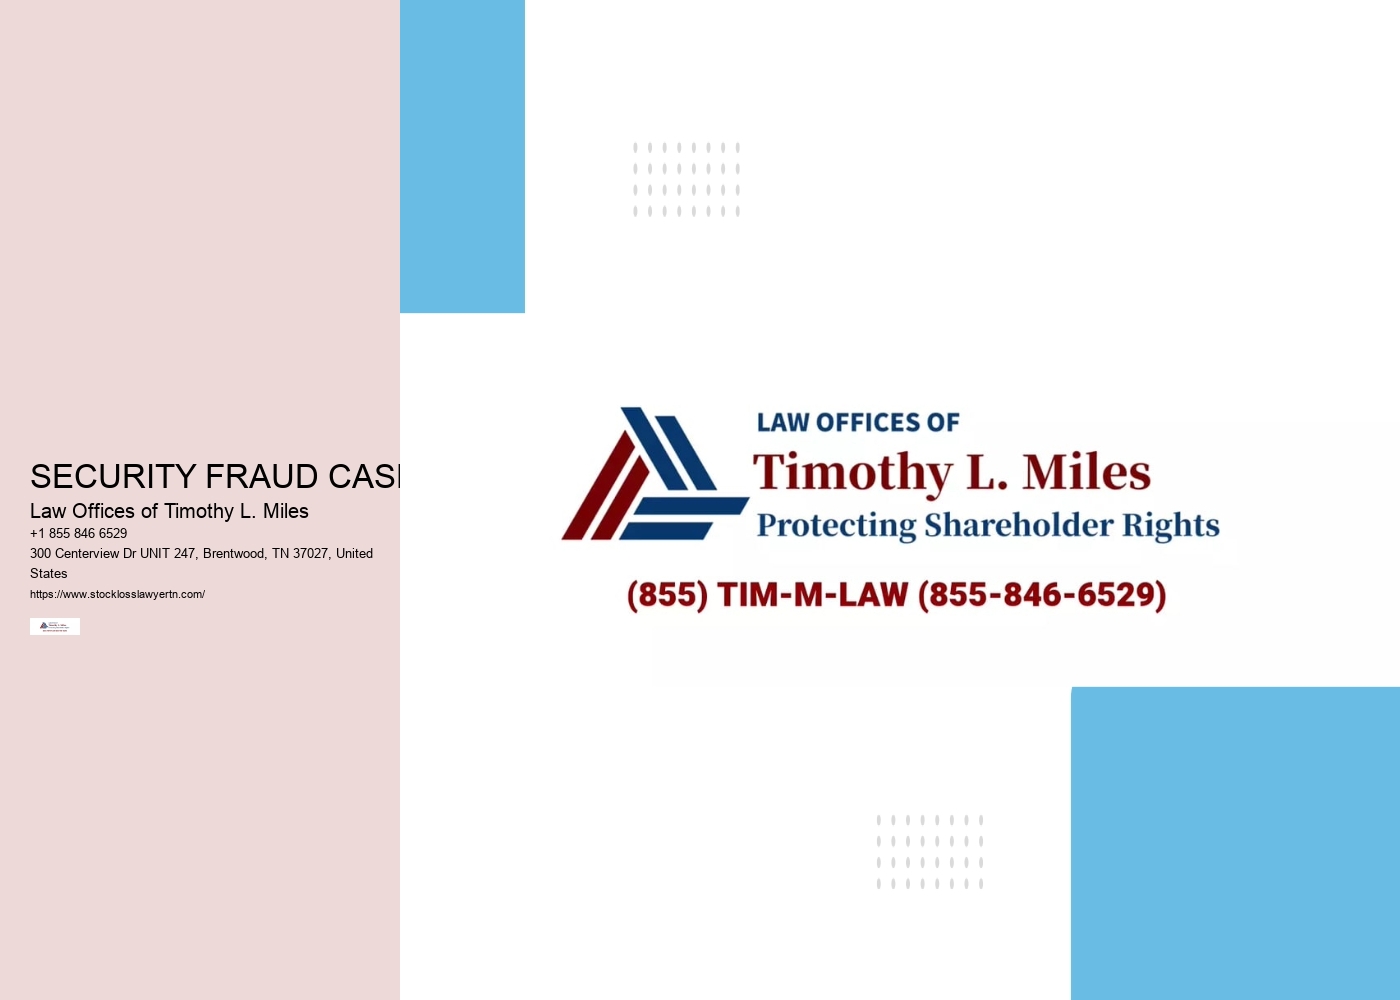 SECURITY FRAUD CASES